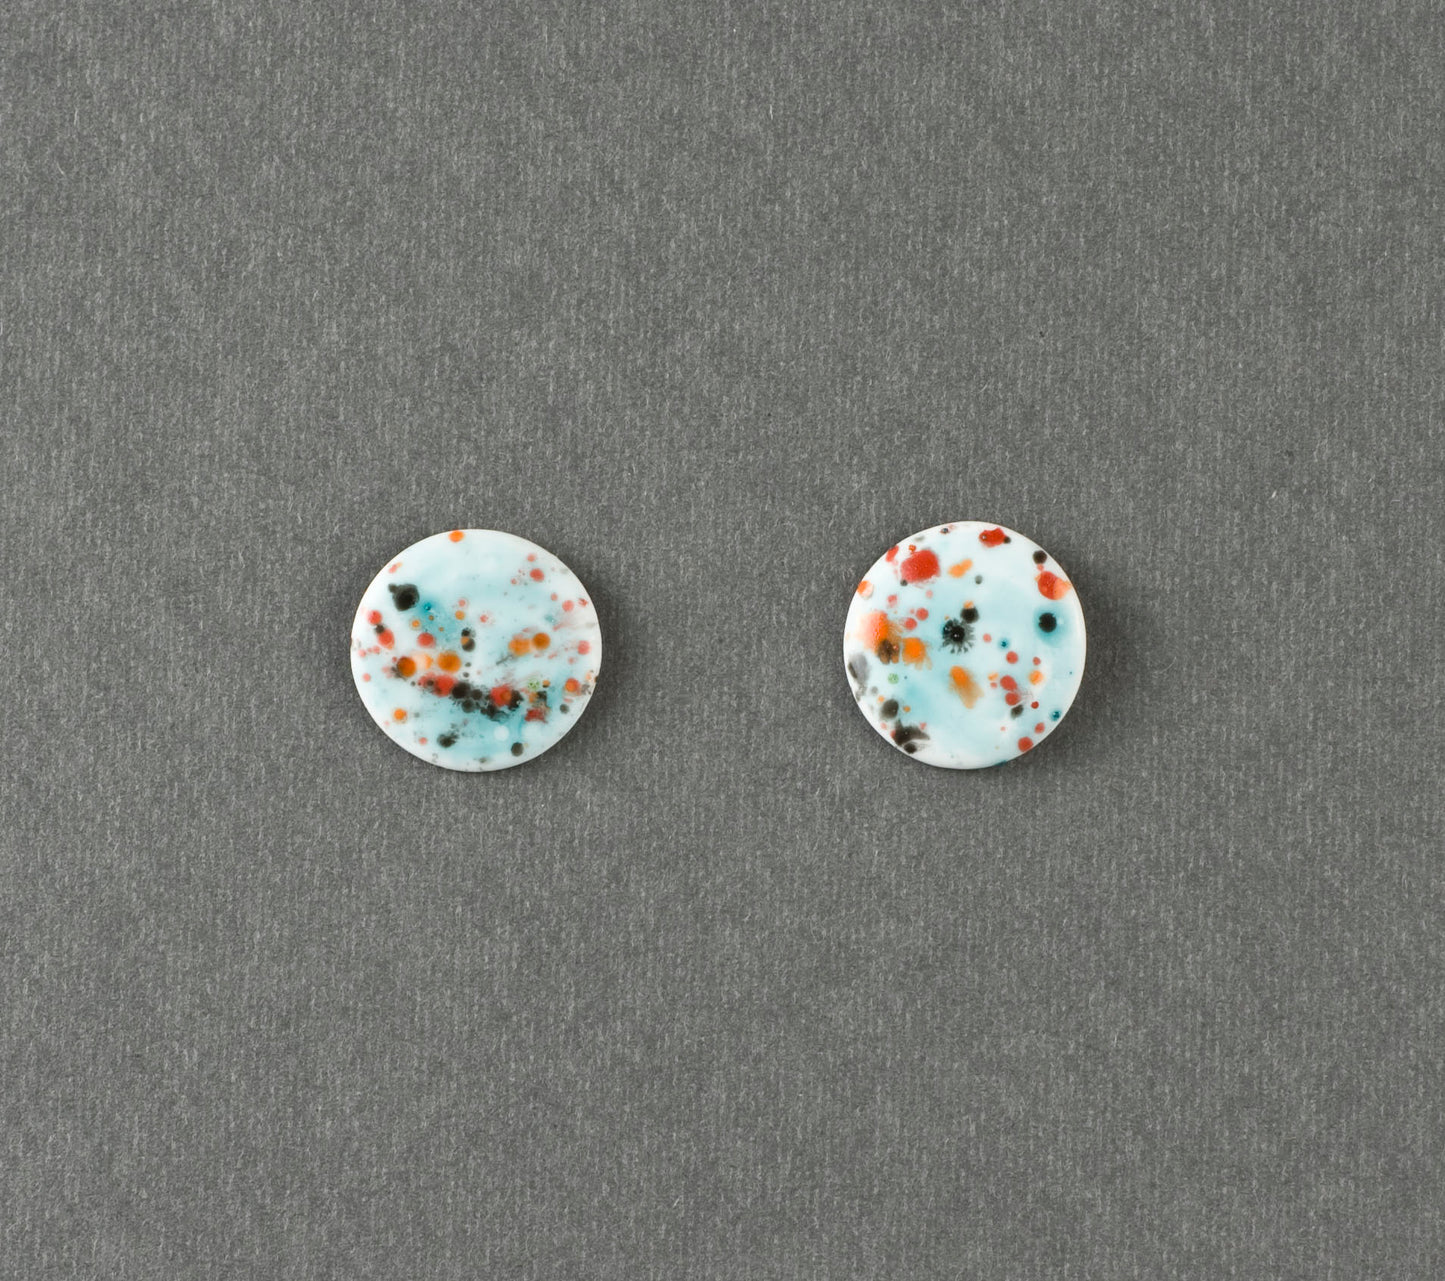 Painted 1.7. Button M earrings